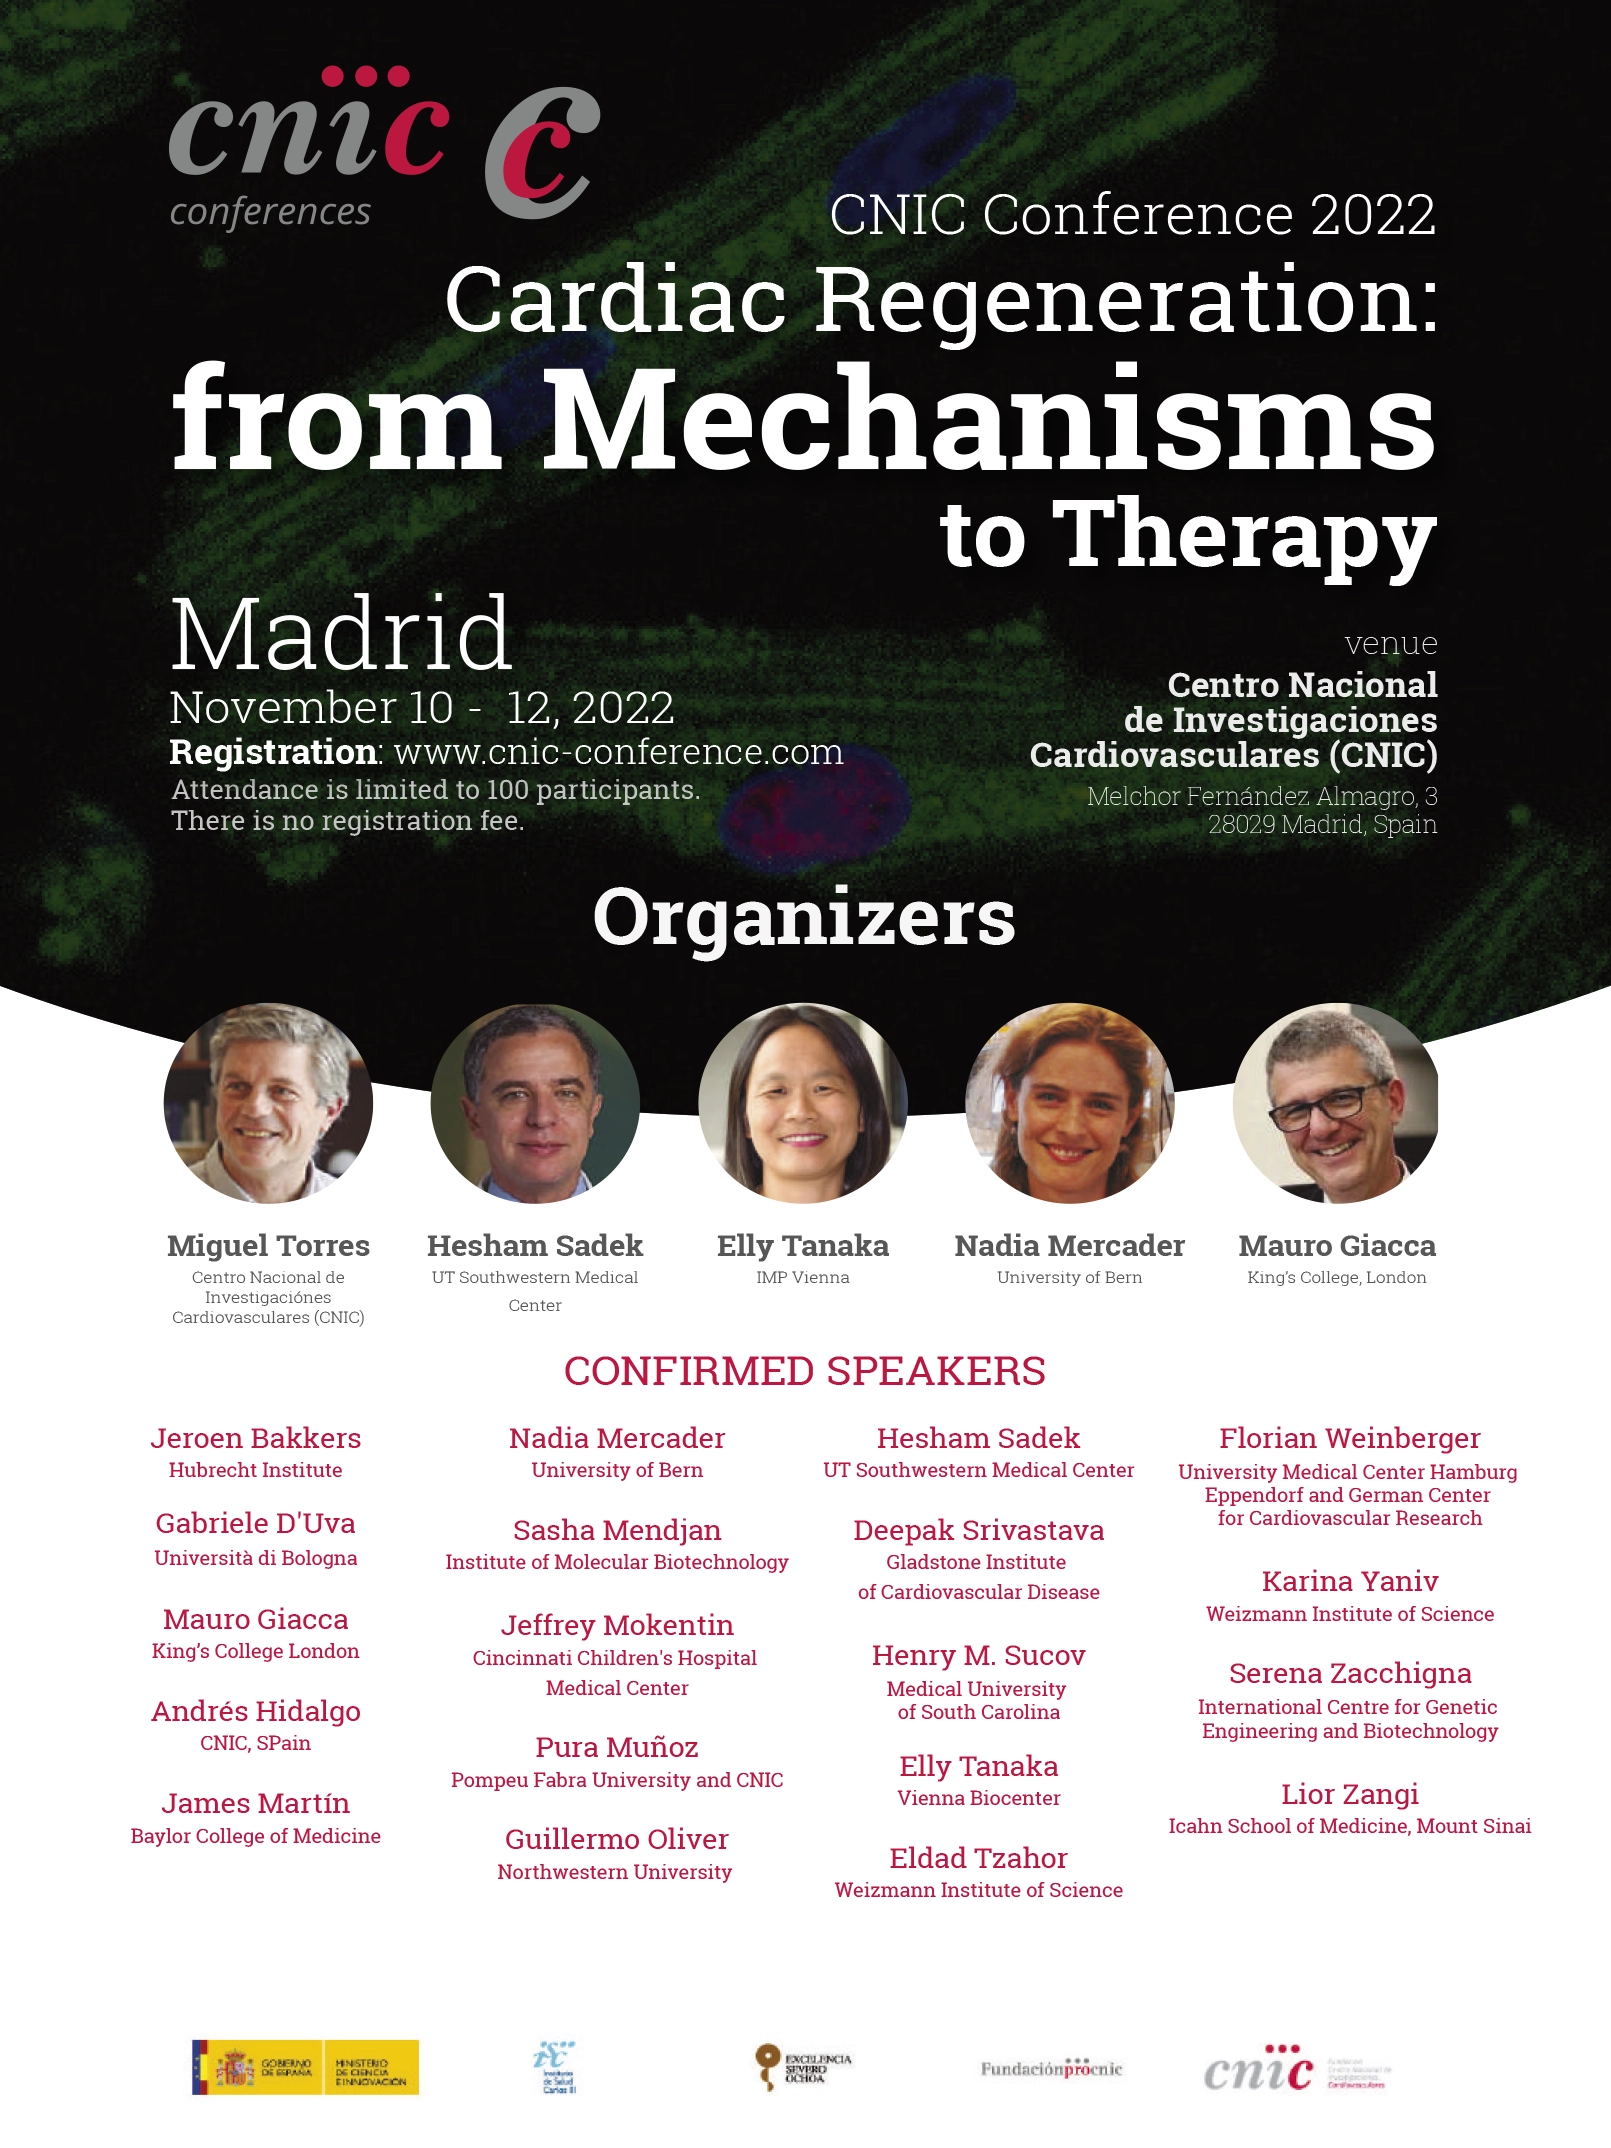 CNIC Conference on Cardiac Regeneration: from Mechanisms to Therapy